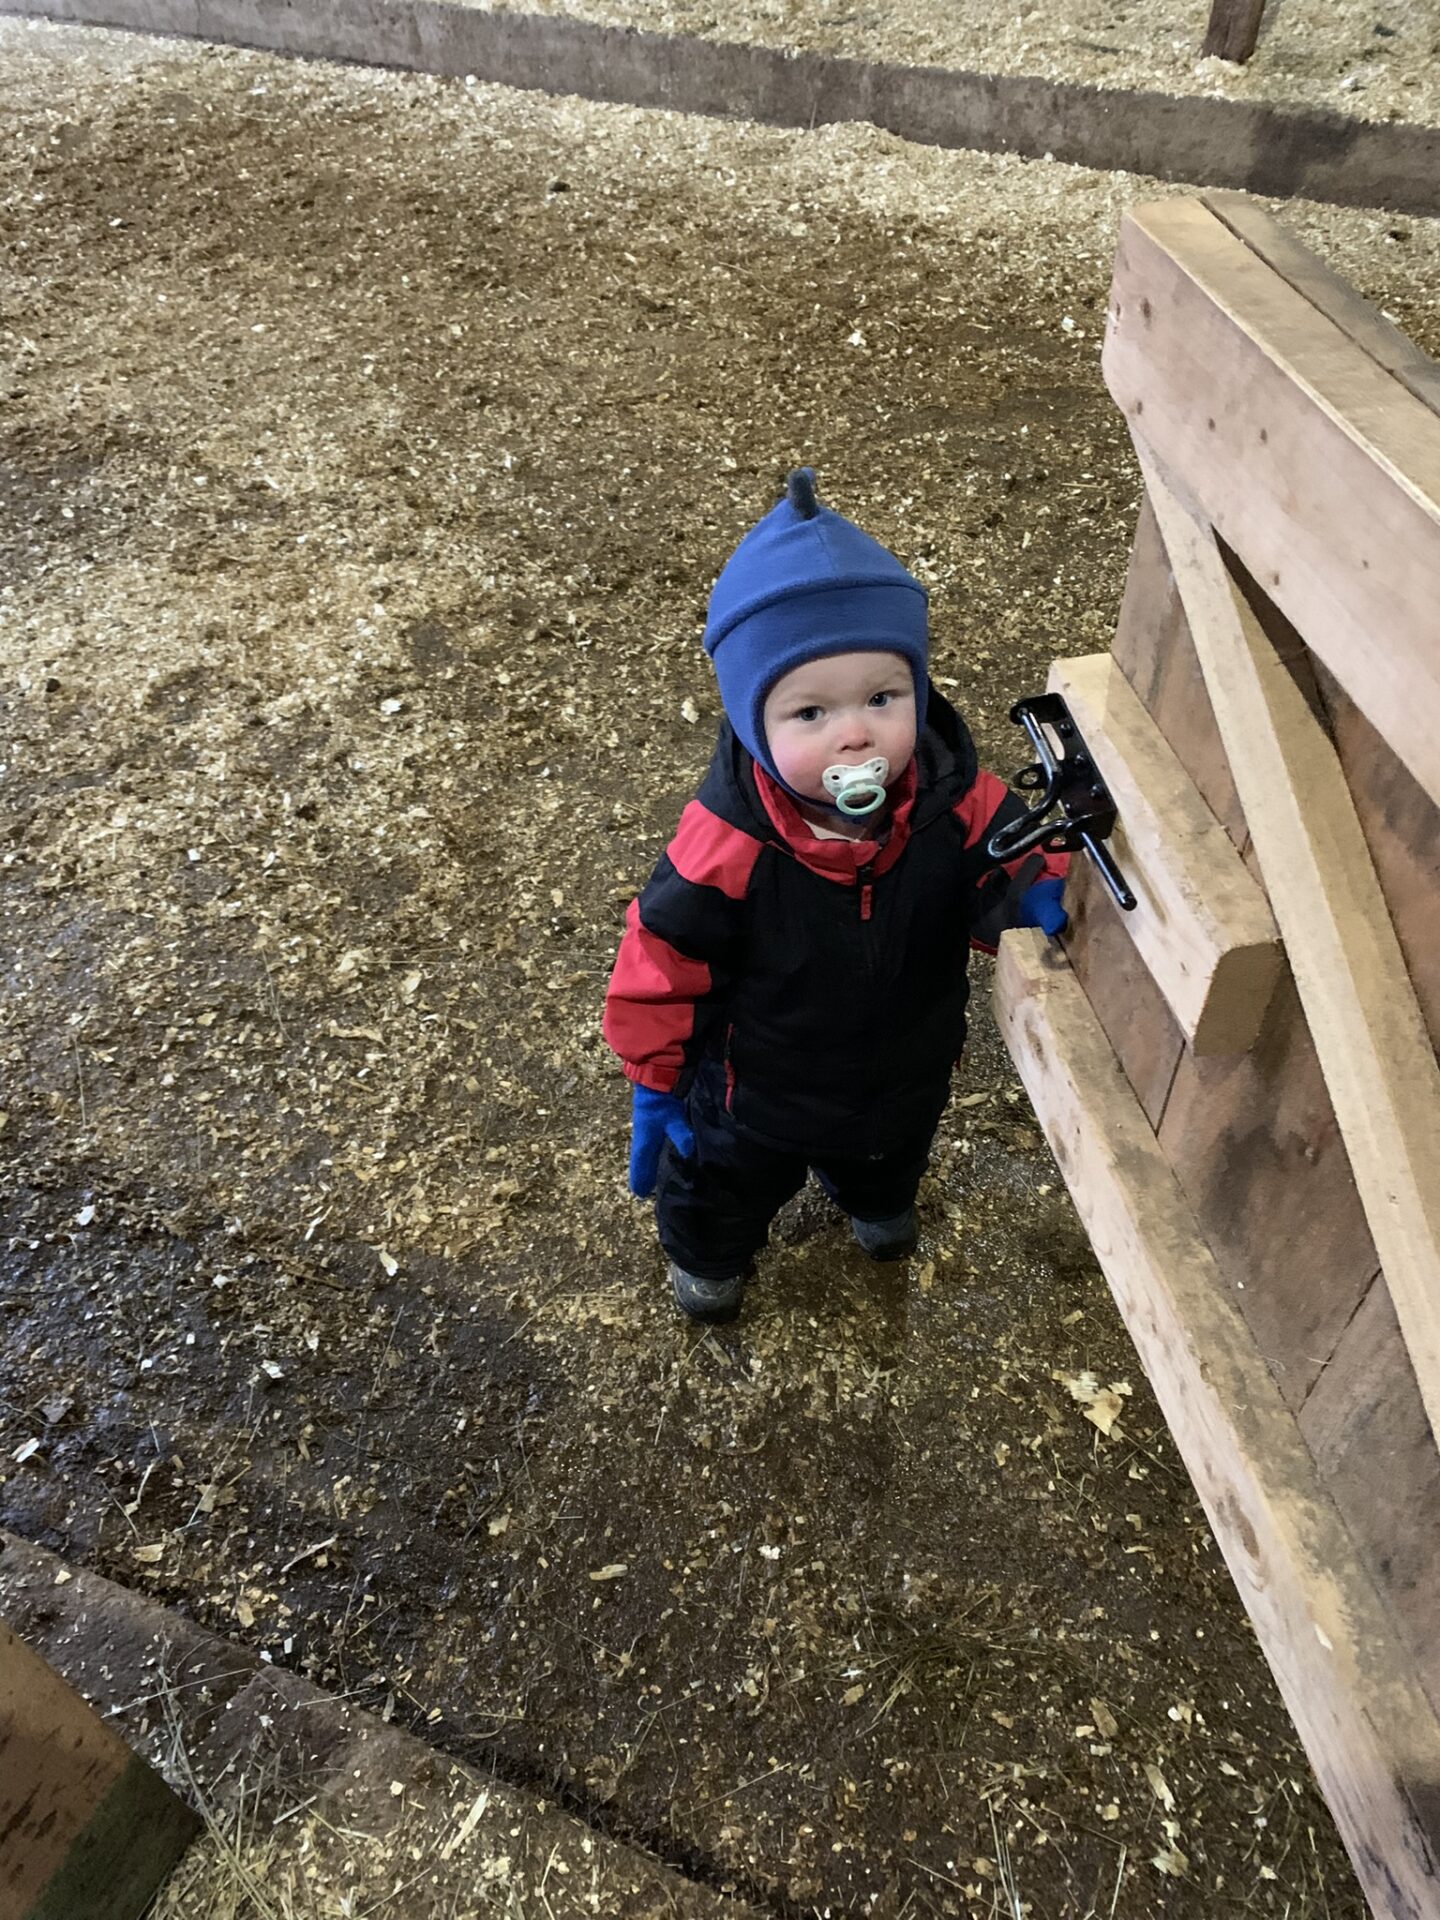 Jack helping his parents with the barn. He loves helping his mom and dad with the barn chores.